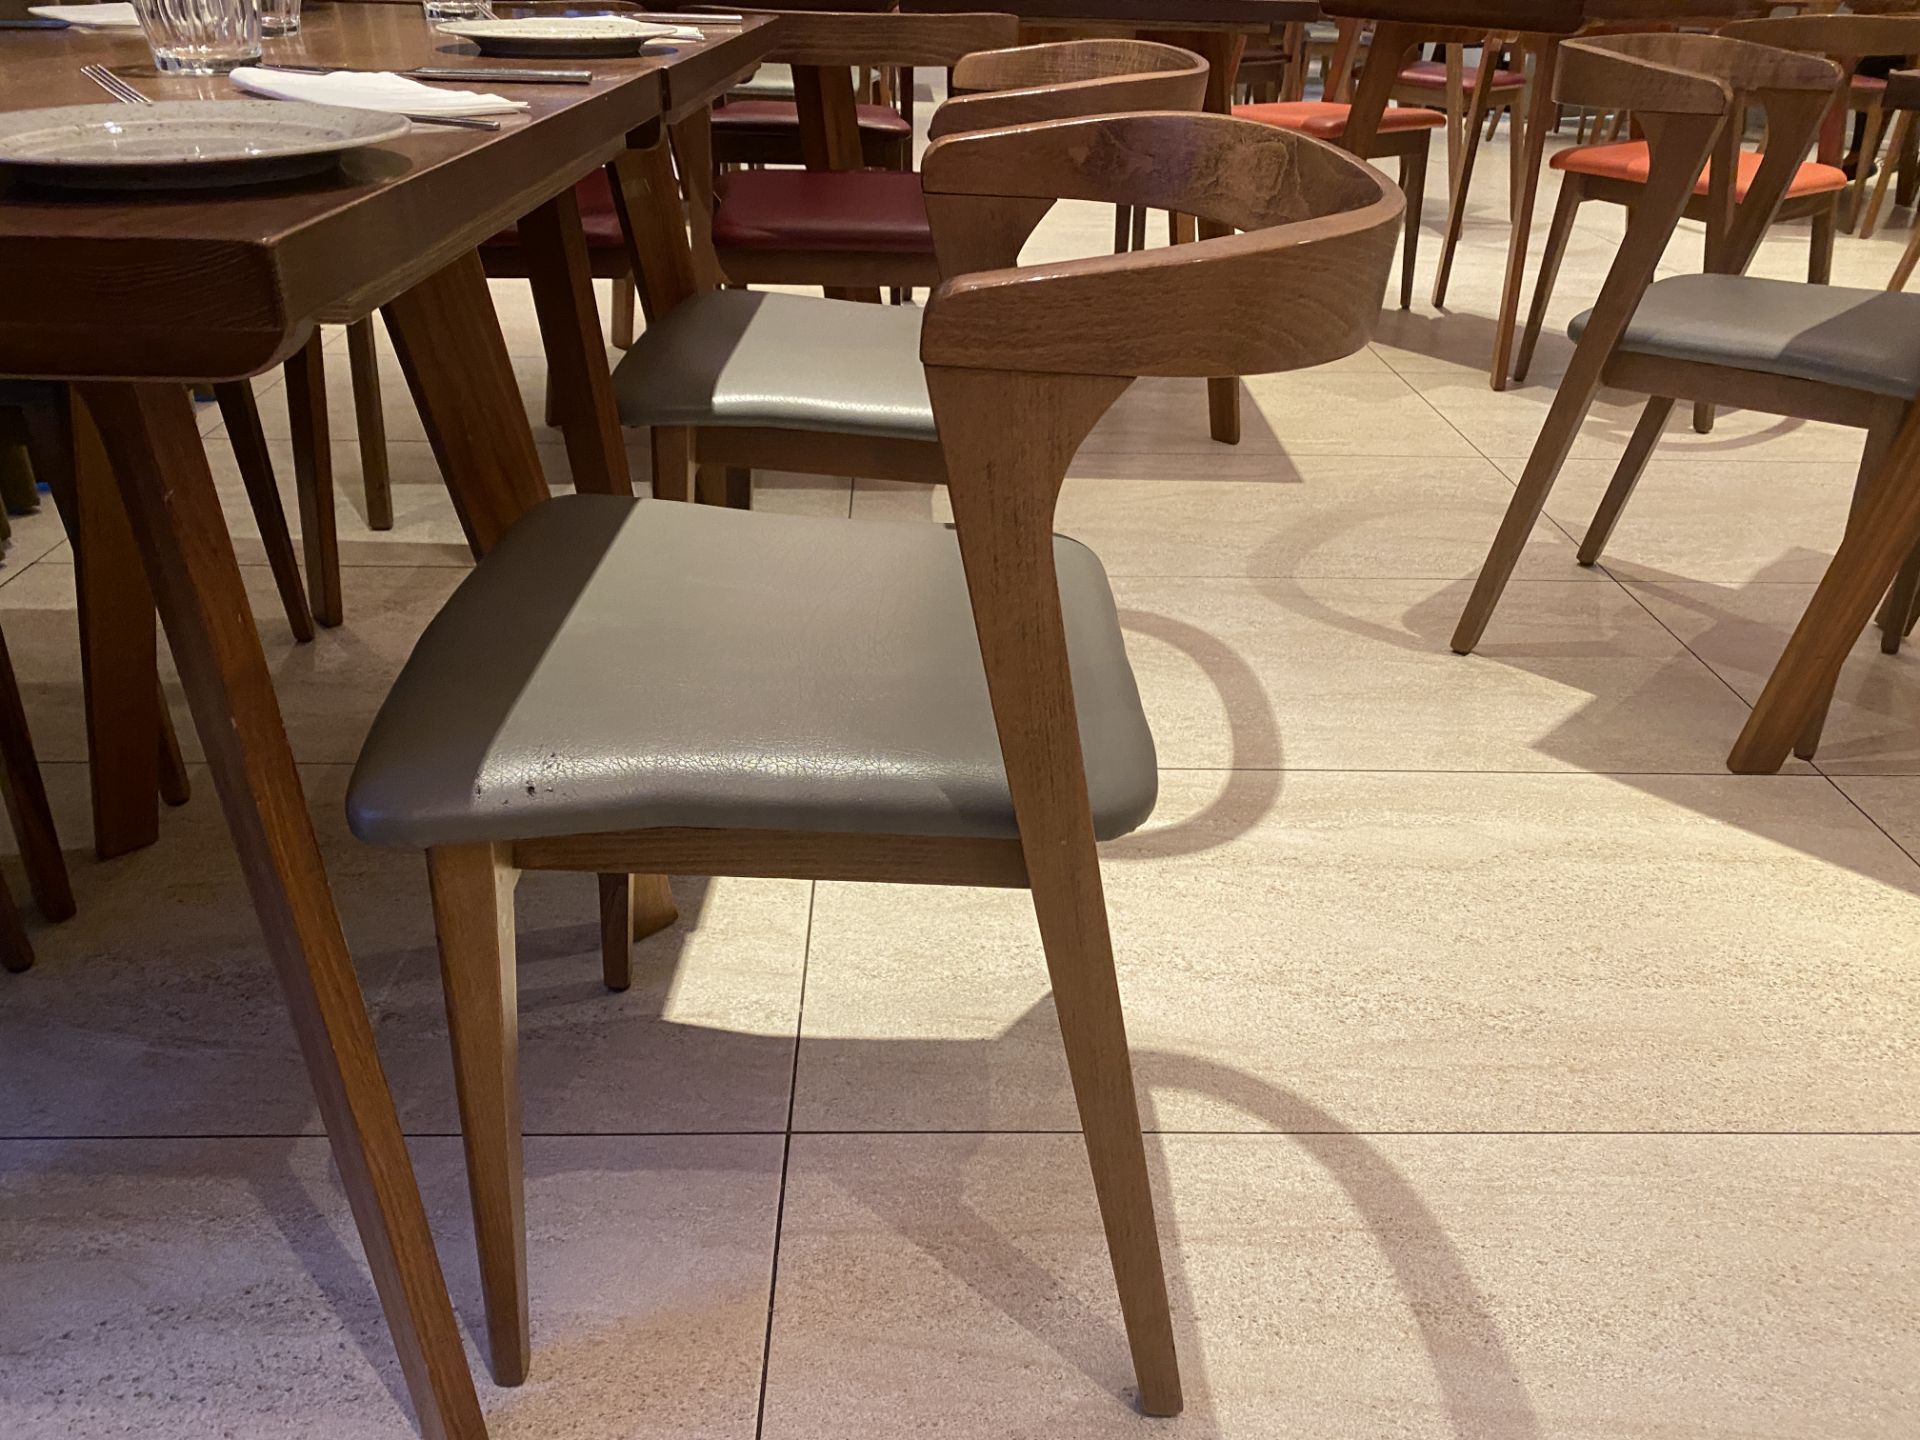 2 Place commercial-grade mid-century style restaurant furniture. - Image 2 of 2